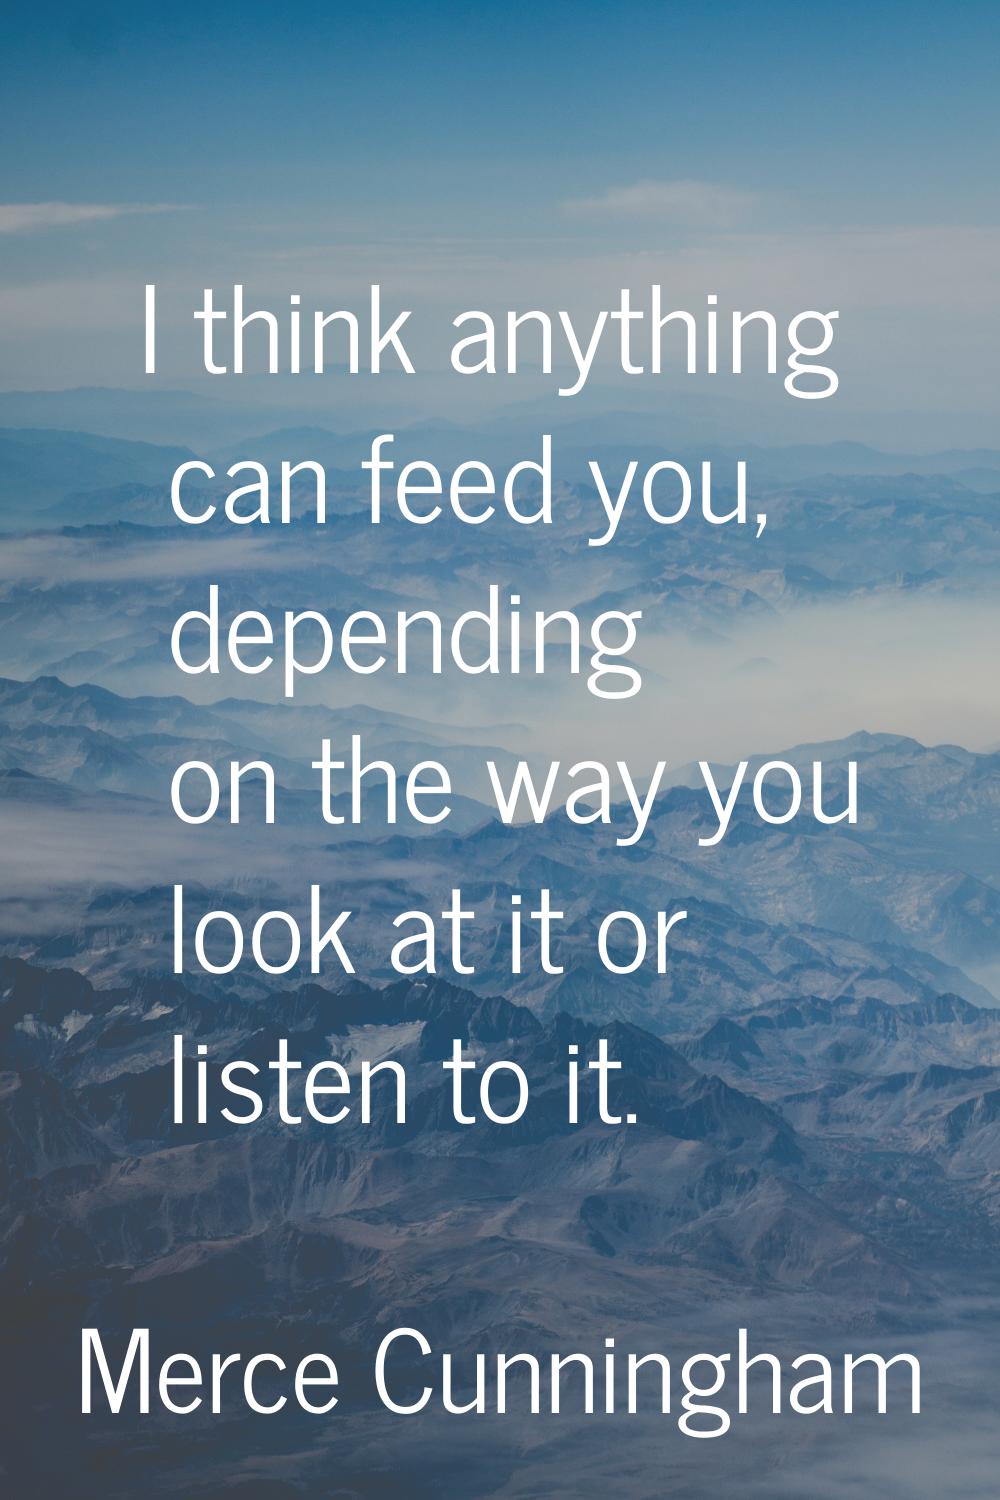 I think anything can feed you, depending on the way you look at it or listen to it.